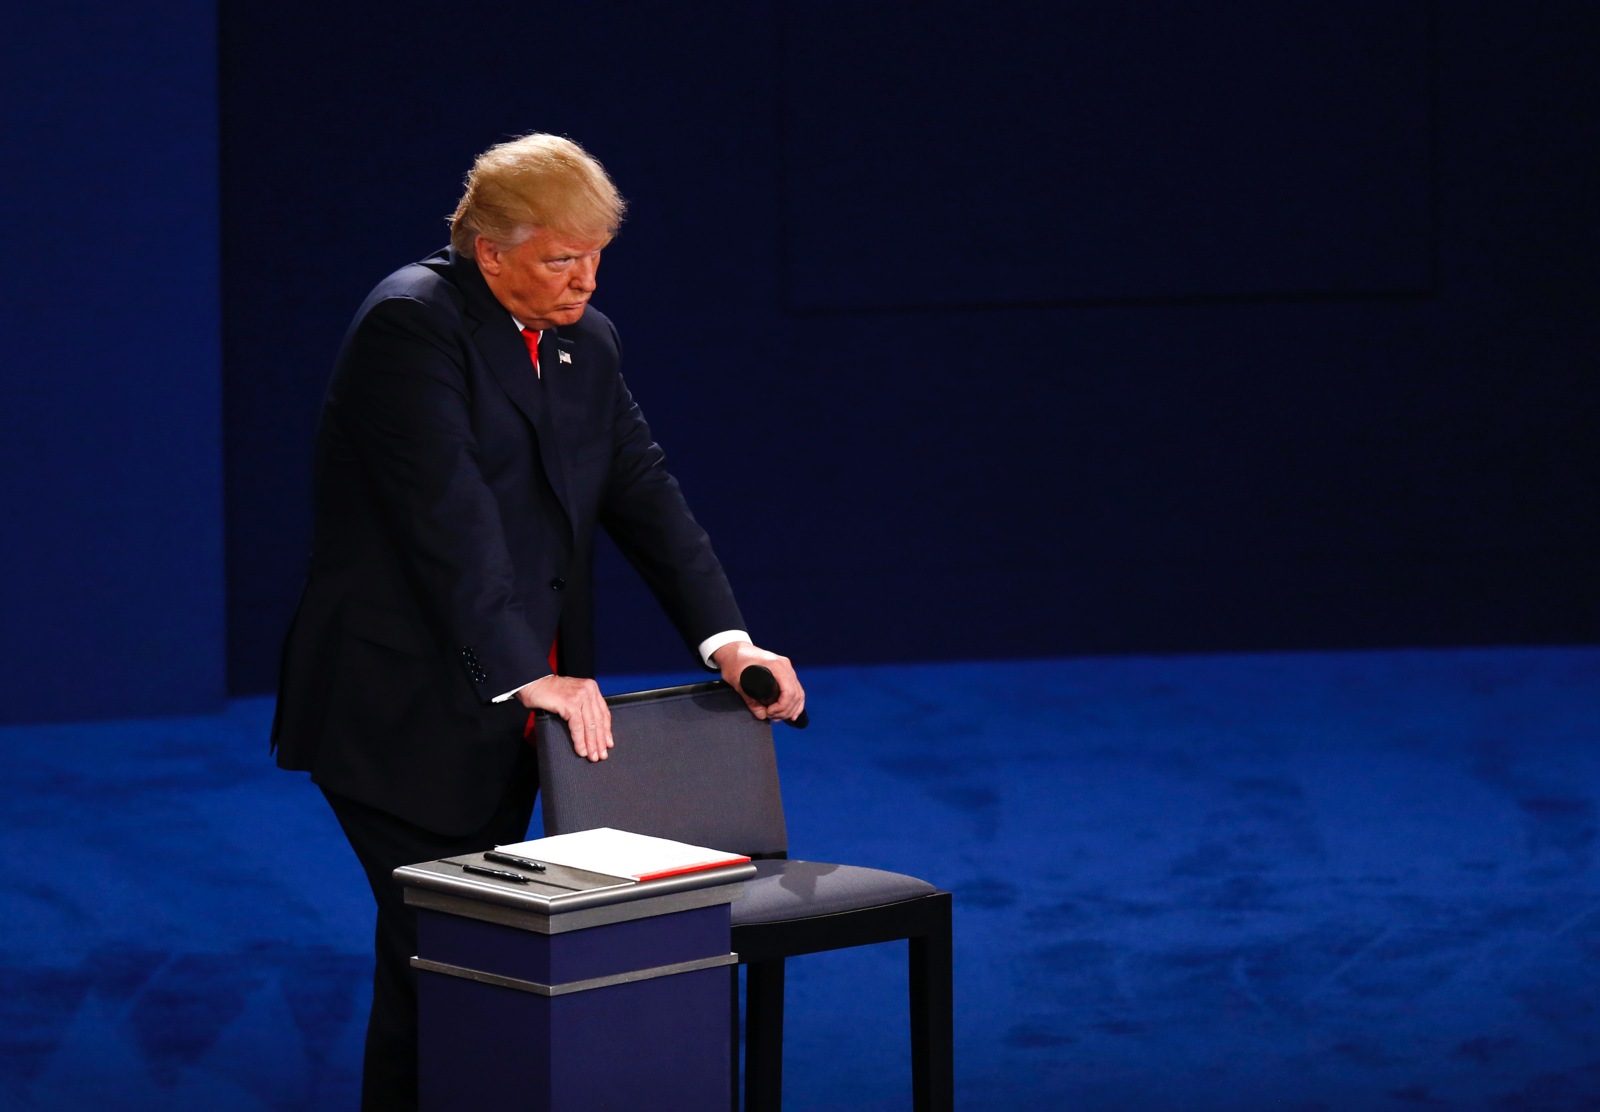 Donald Trump during the second presidential debate at Washington University in St. Louis, October 9, 2016